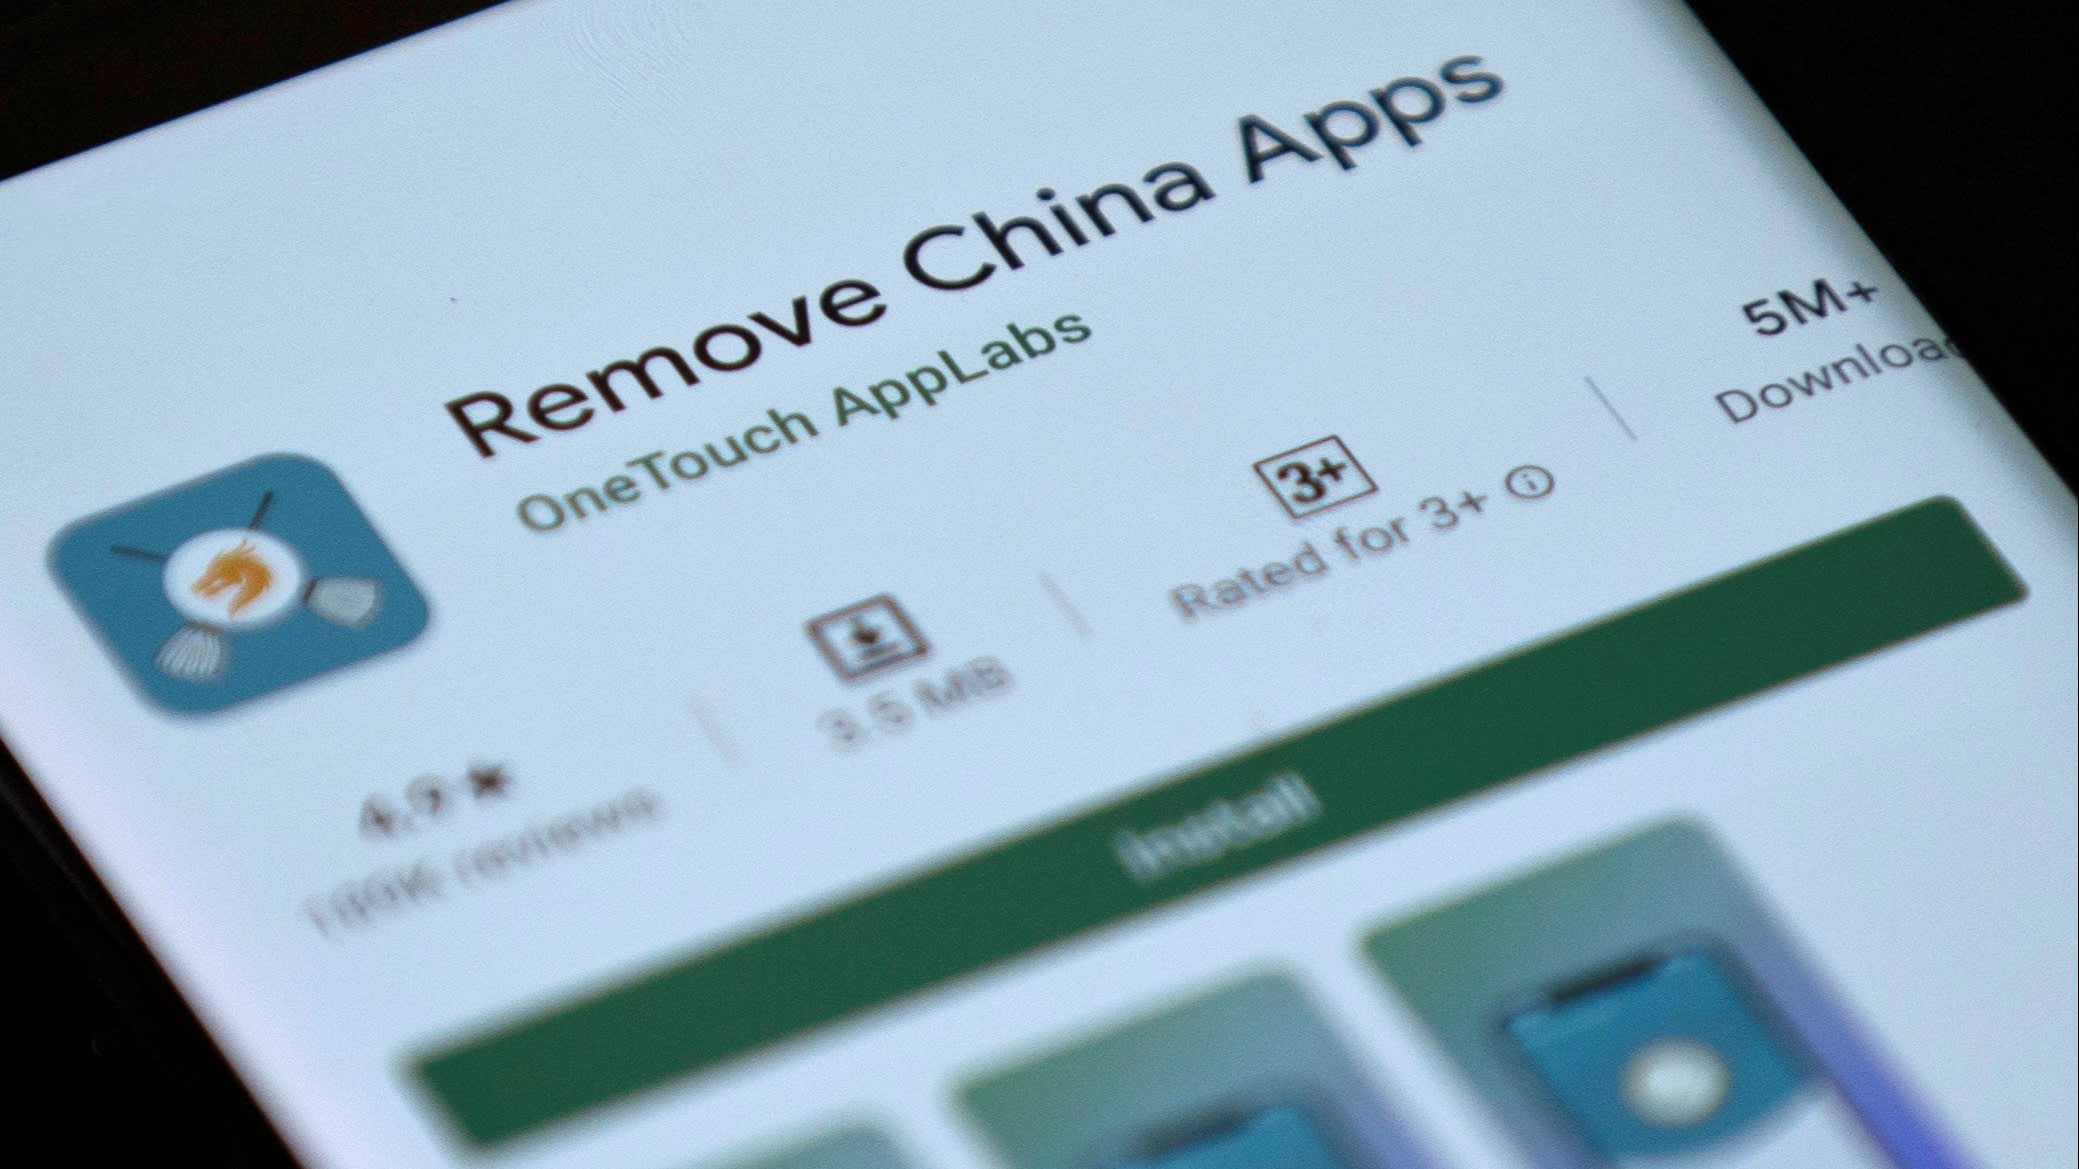 Google removes Indian app from the Play Store that helped in removing Chinese apps from smartphones